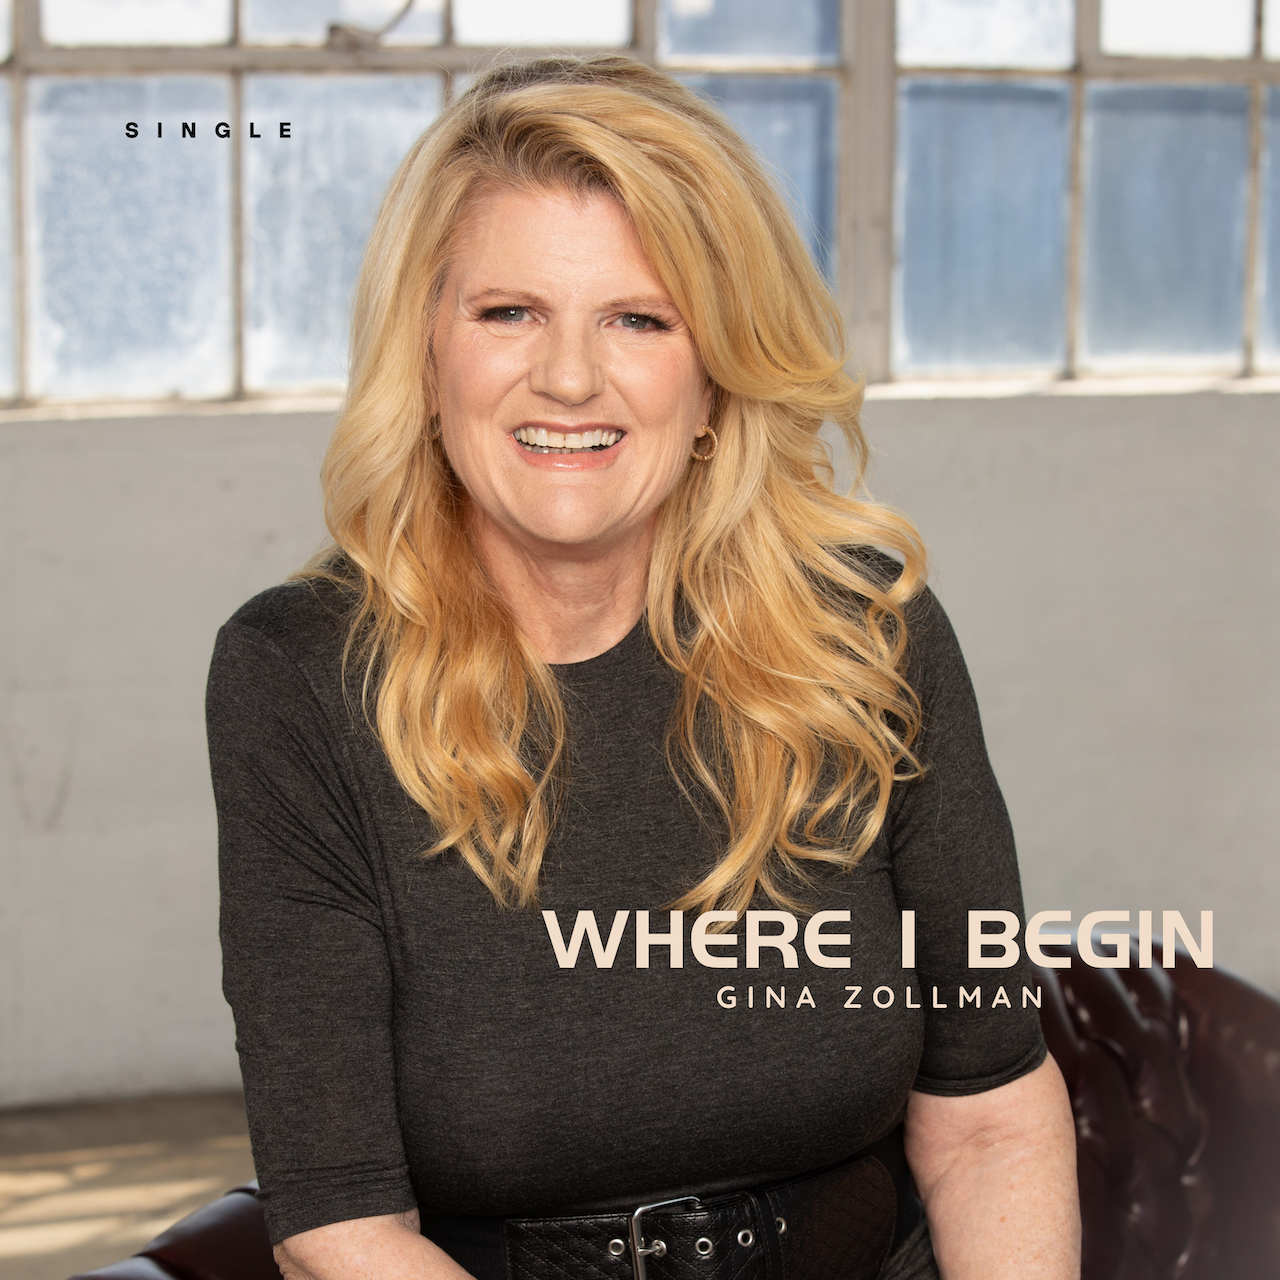 Gina Zollman’s Highly Anticipated New Single "Where I Begin" Via Tribeca Records Now Available Worldwide  